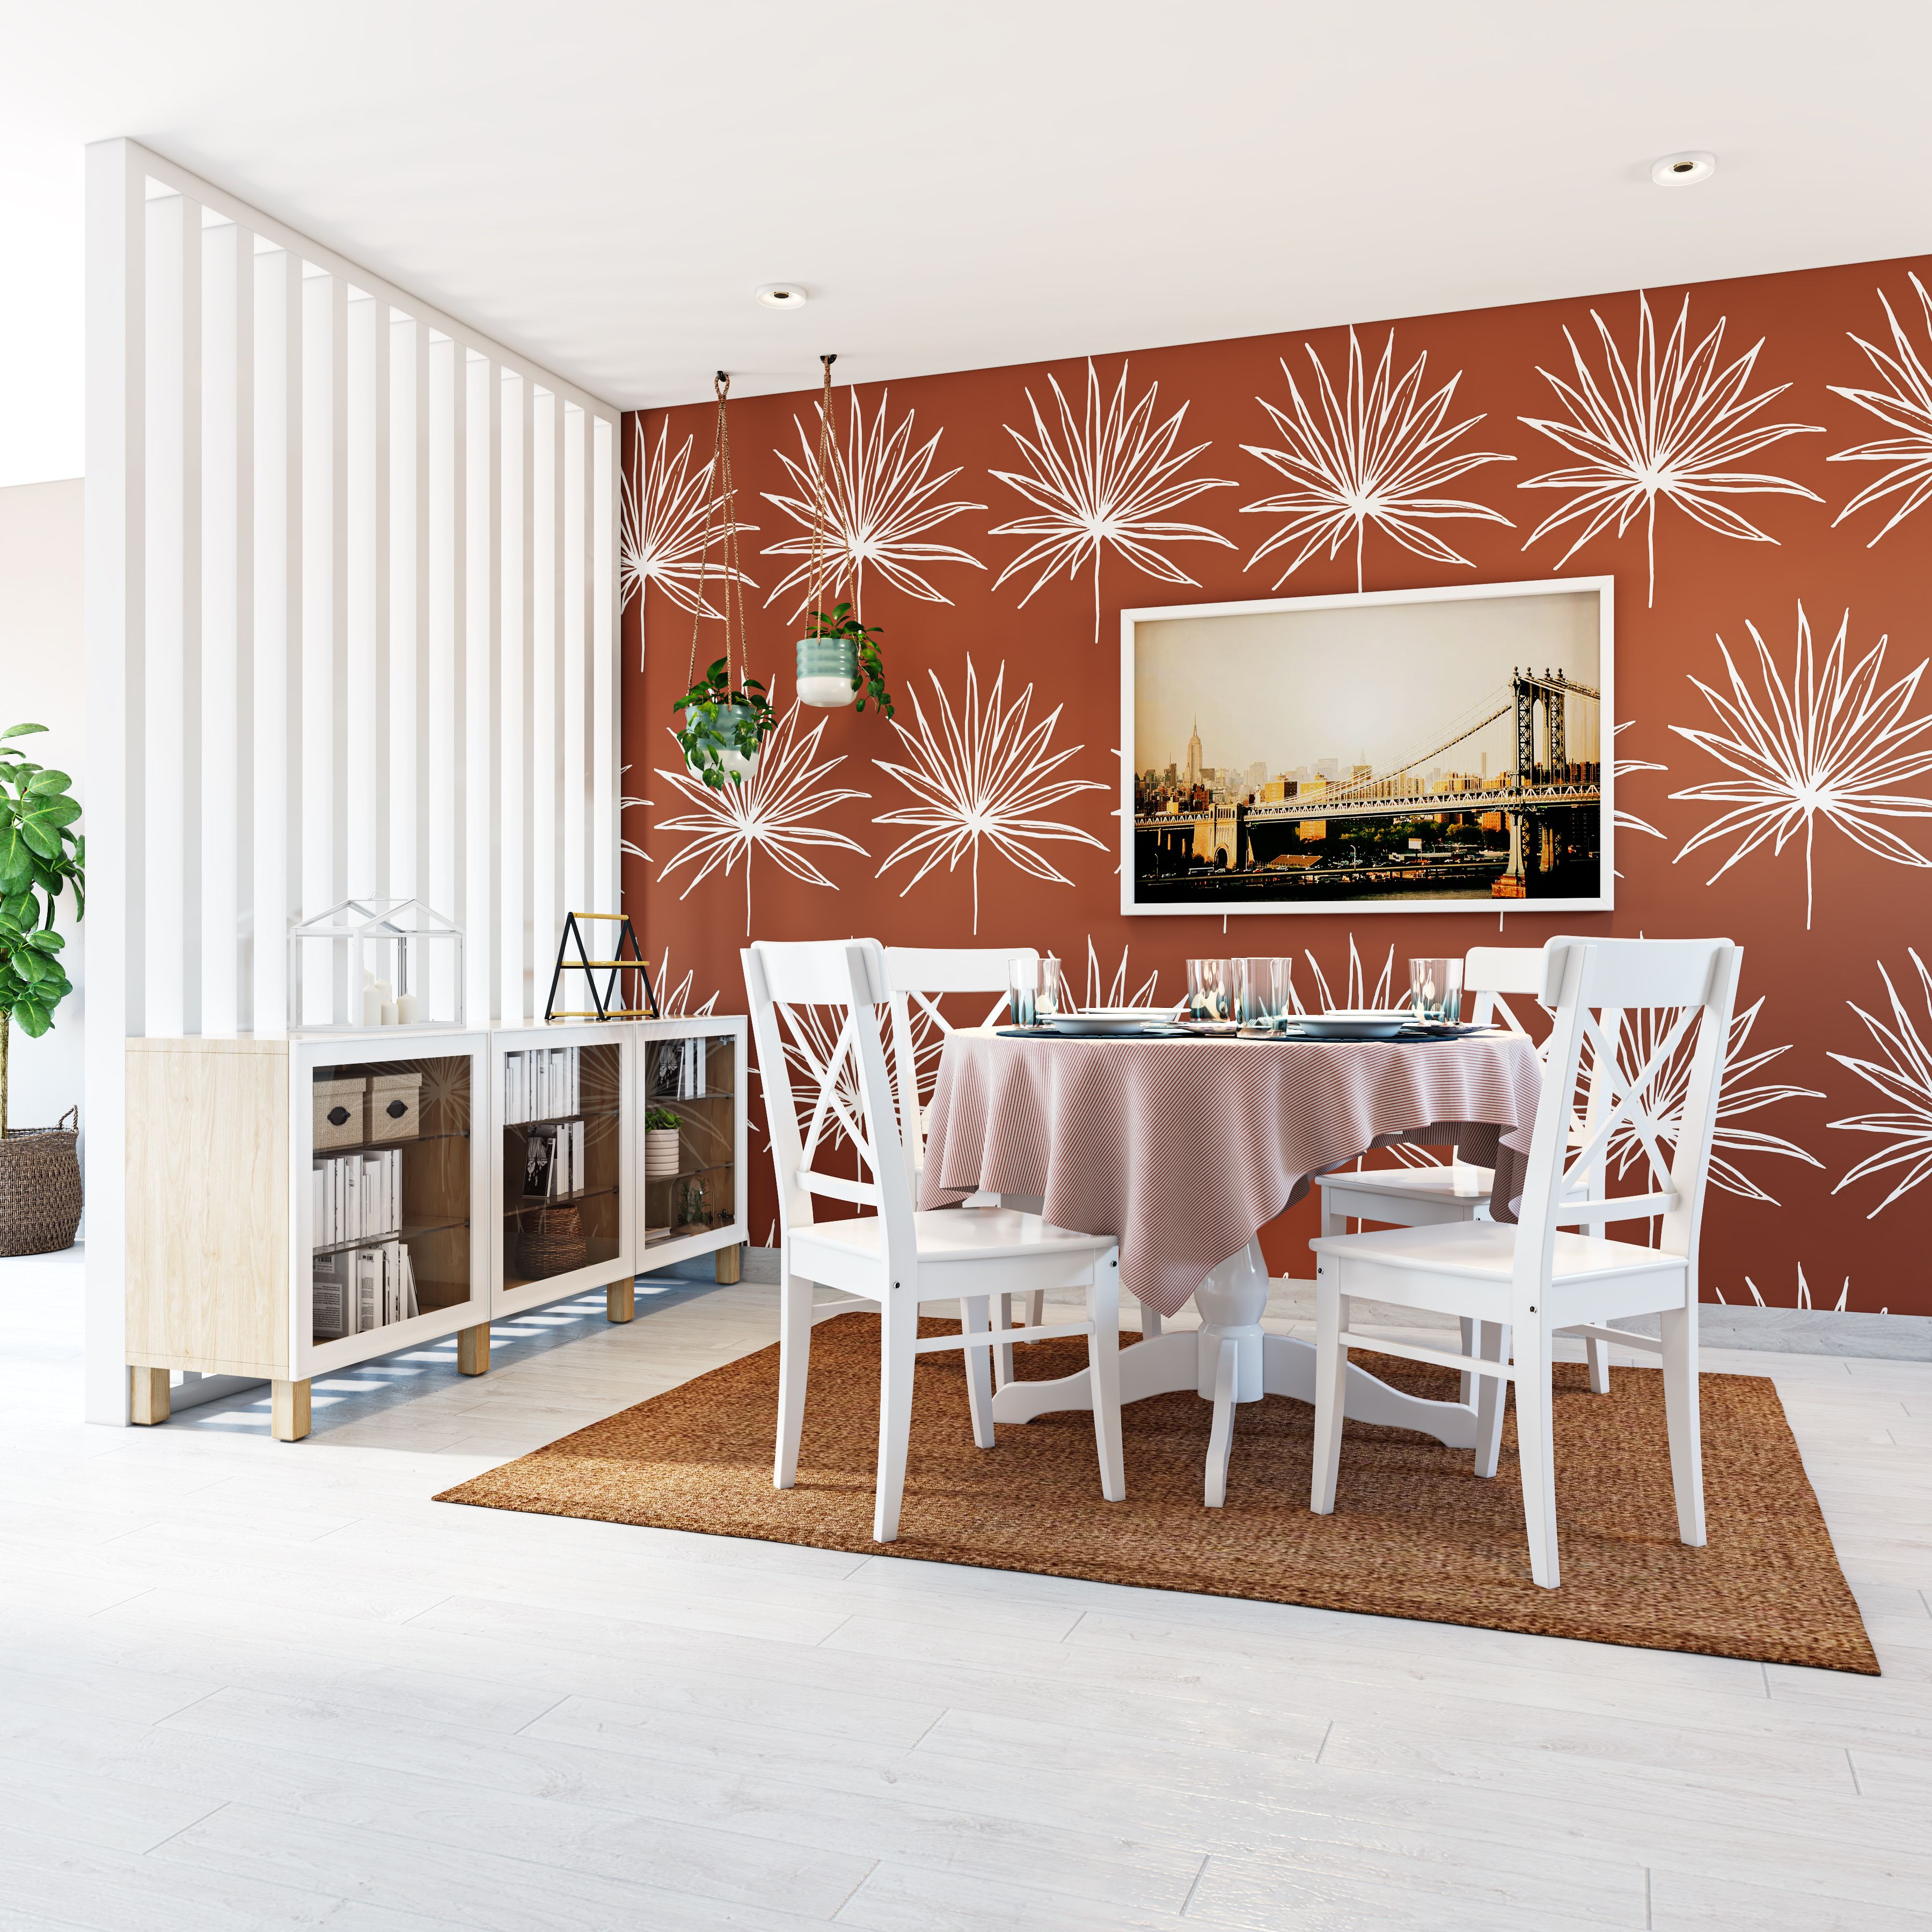 Contemporary Dining Room Design With Patterned Wall And Art Piece